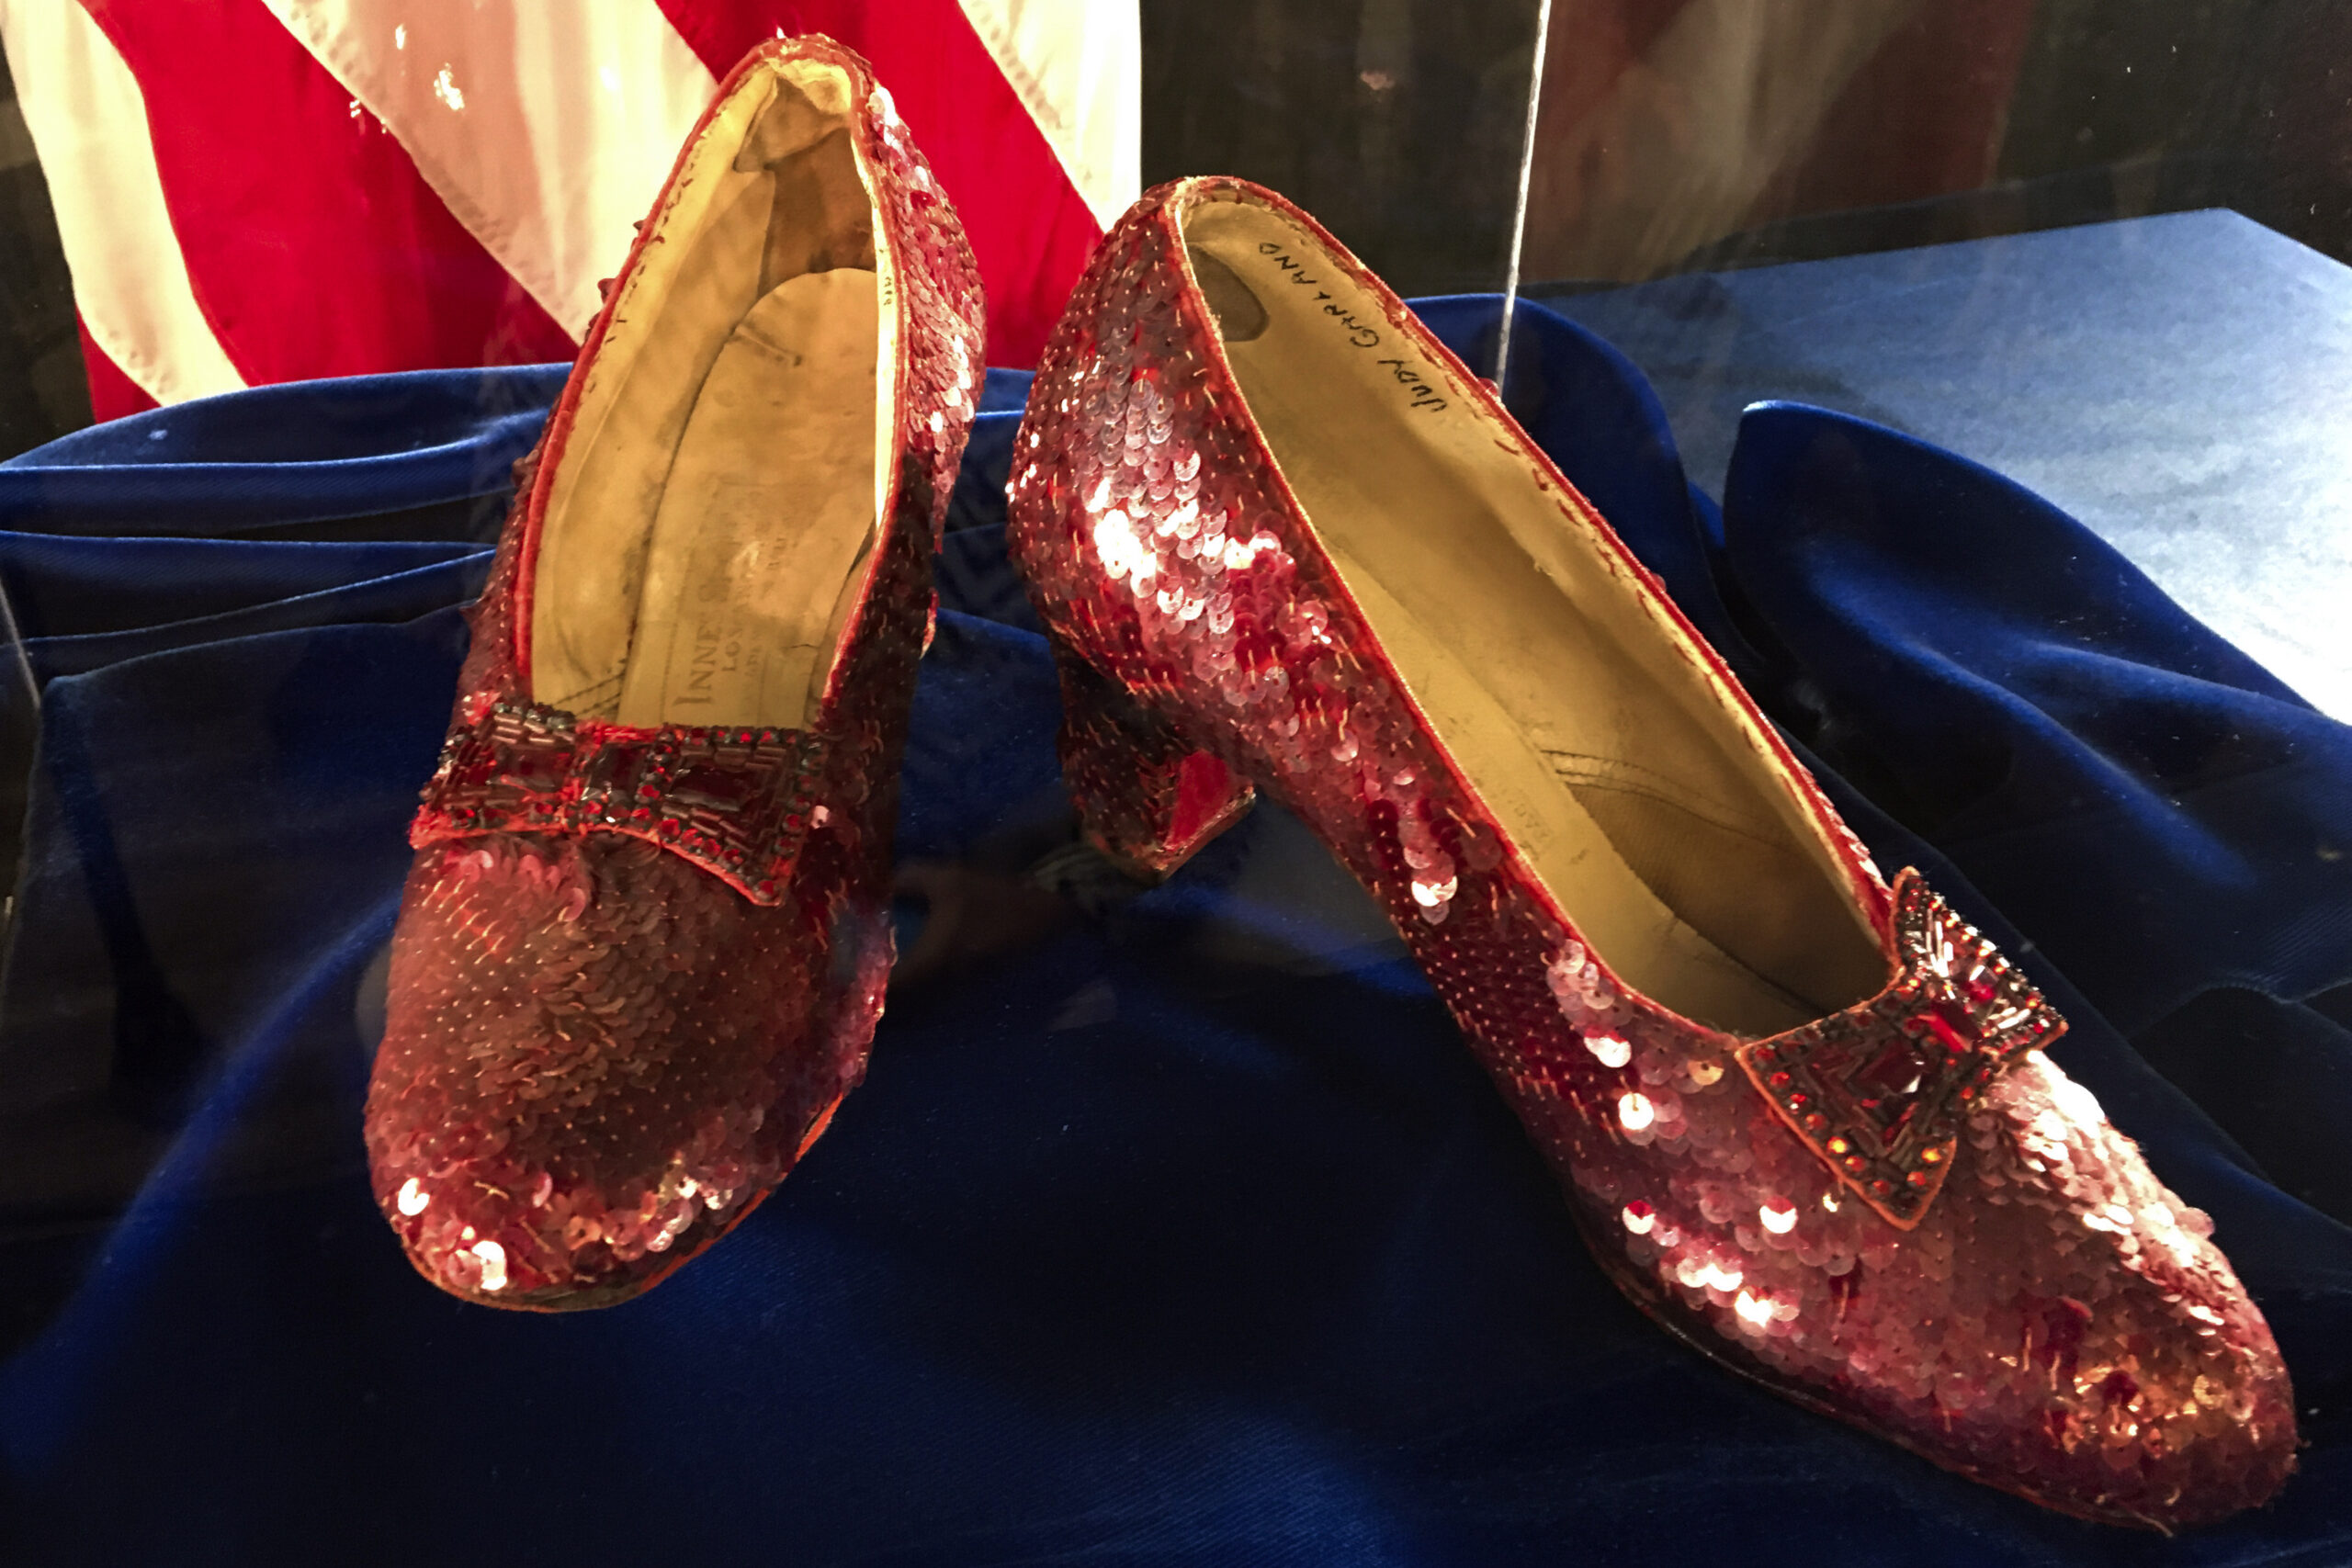 FILE - A pair of ruby slippers once worn by actress Judy Garland in the "The Wizard of Oz" sit on d...